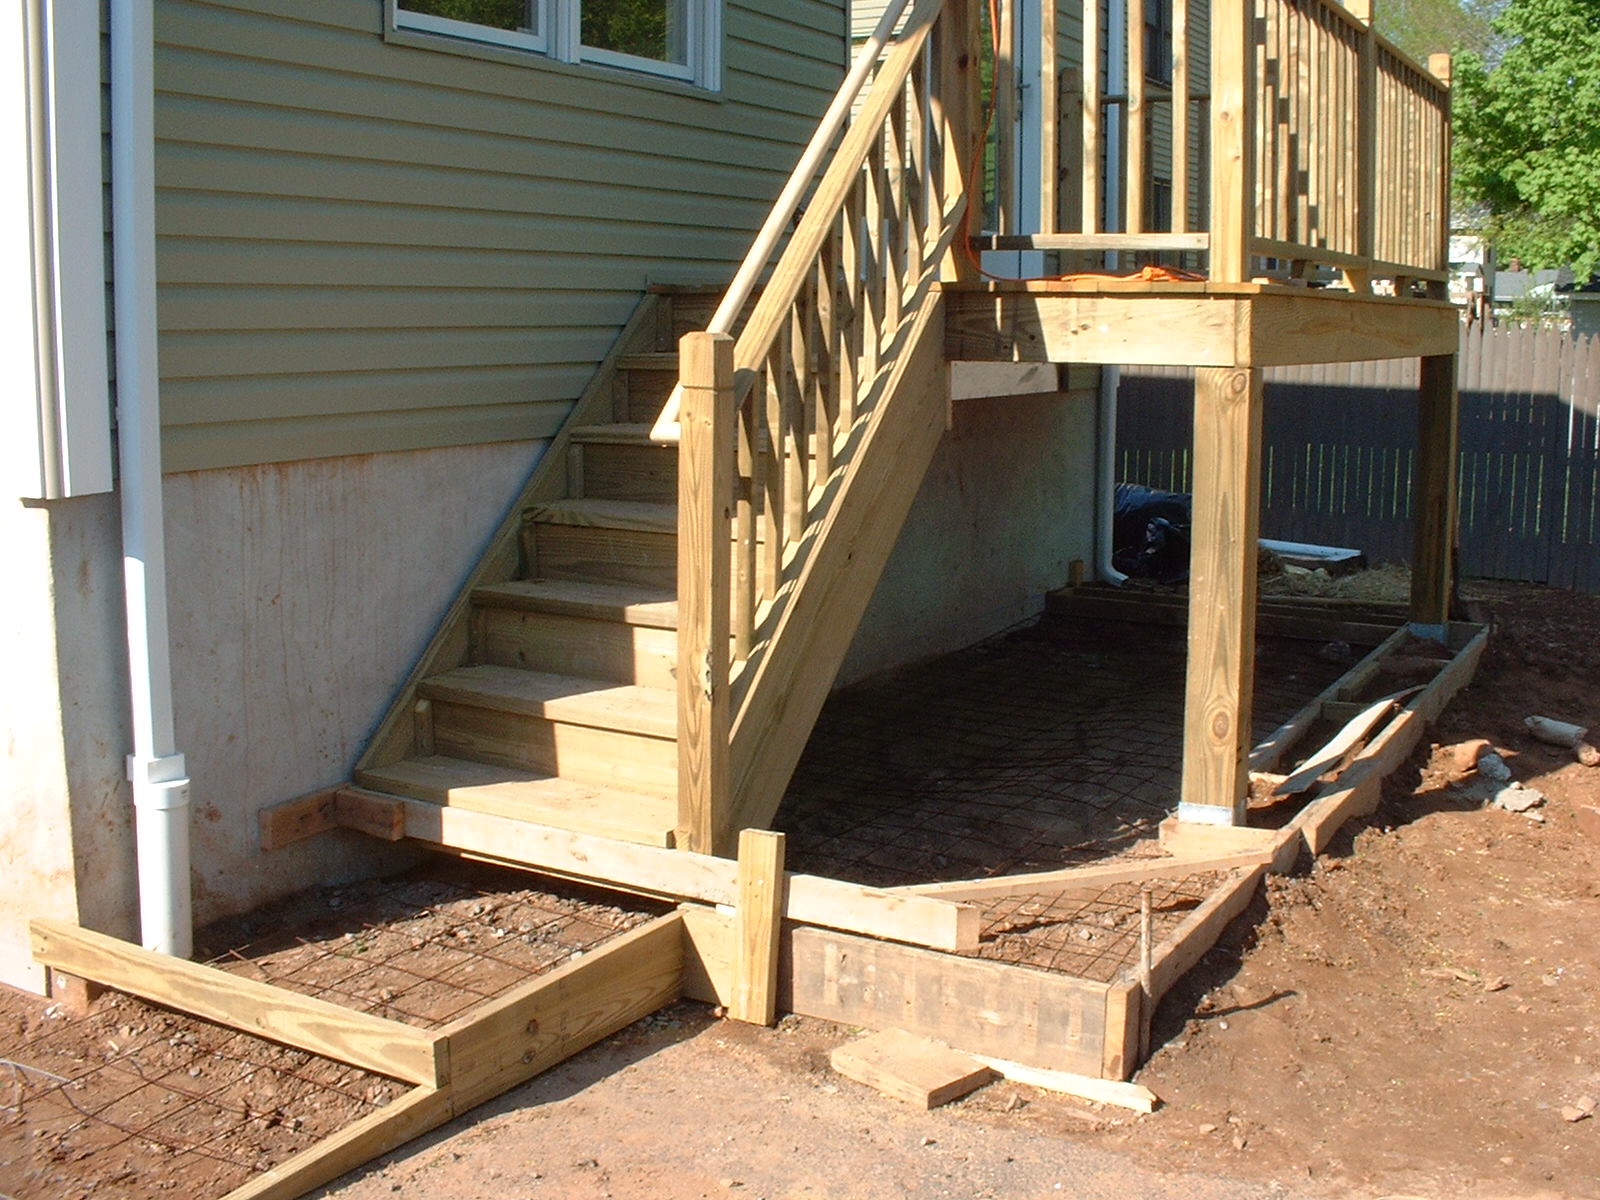 A slab will be poured below the deck to store garbage cans.